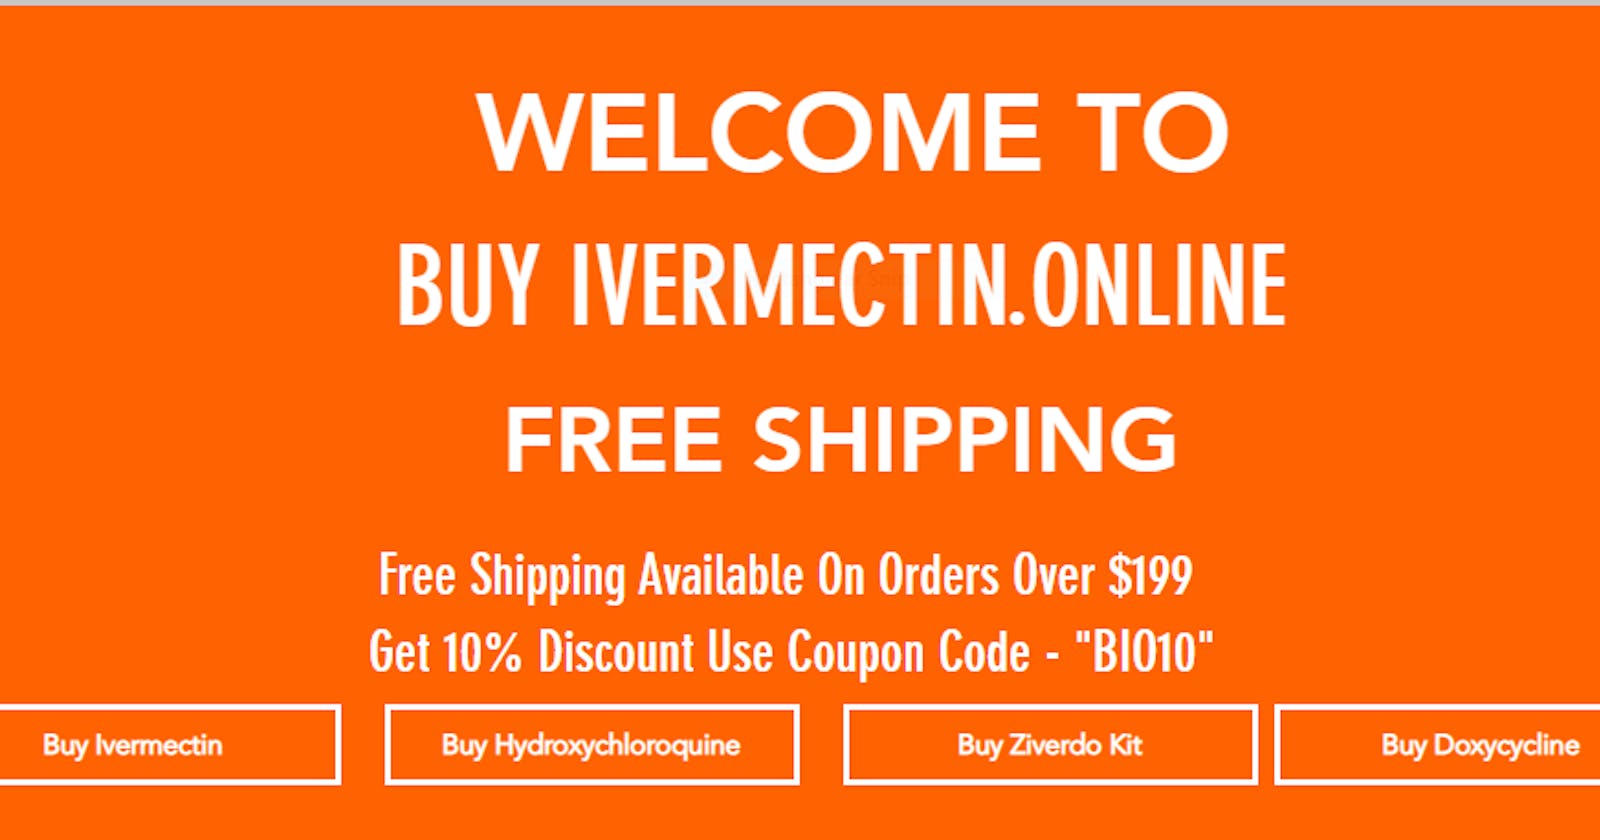 Buy Ivermectin Online for CoVID-19 Treatment